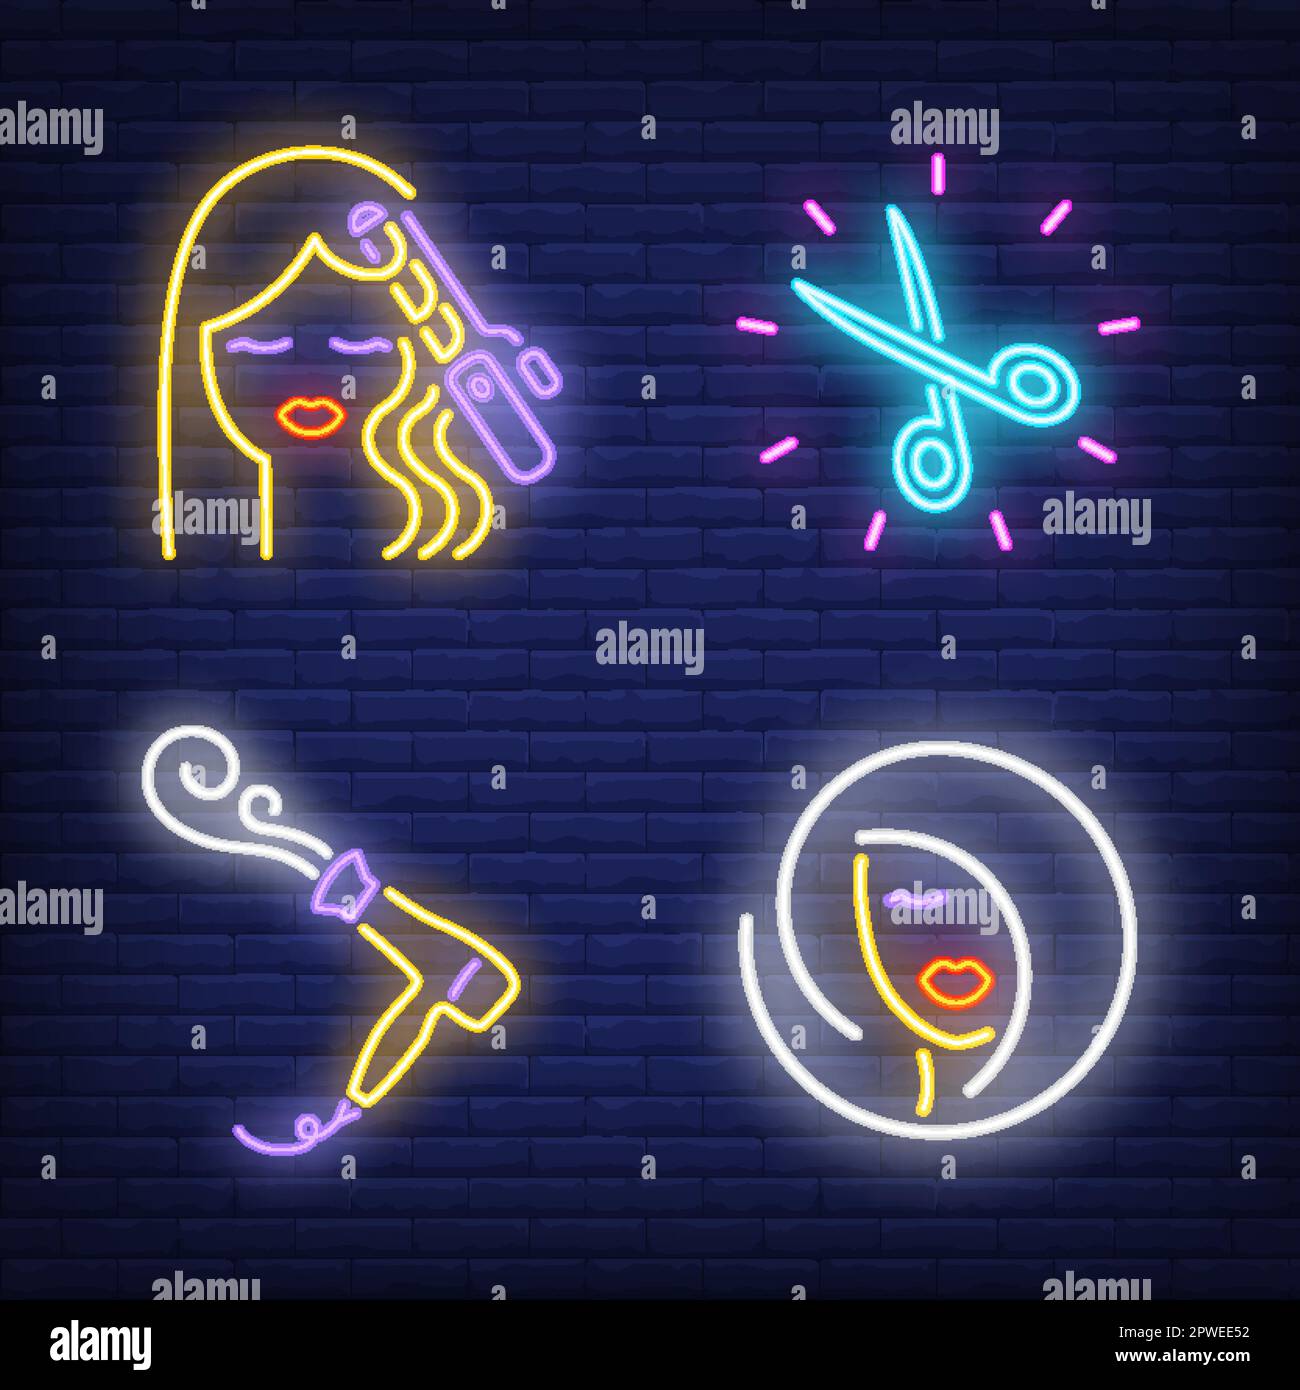 Women and hairdressing accessories neon signs set Stock Vector